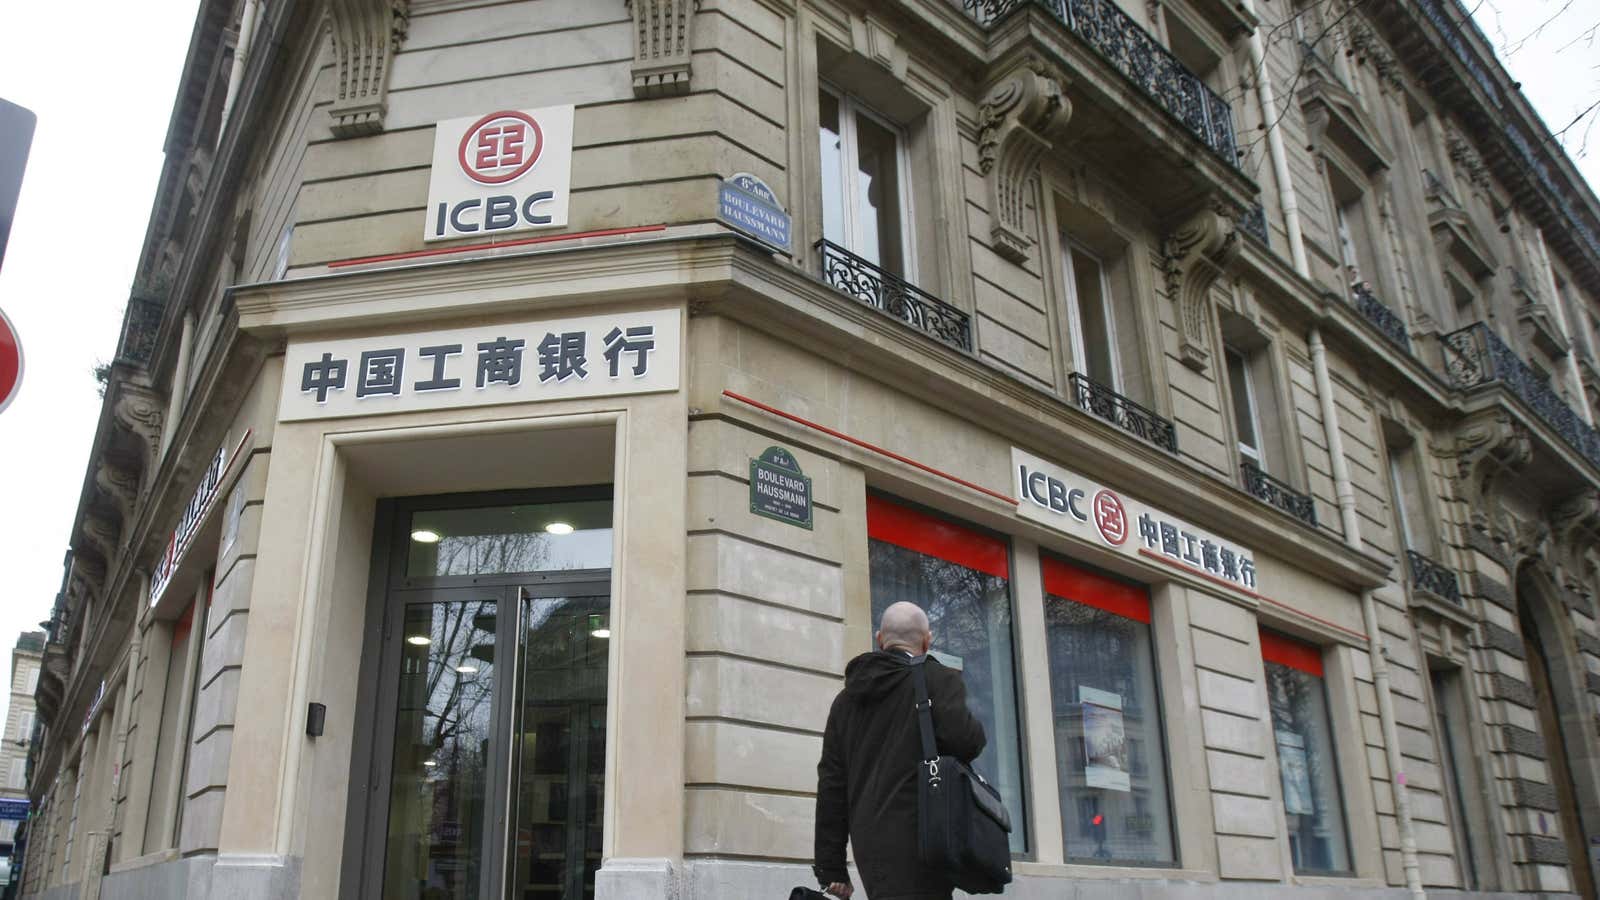 A Paris branch of Chinese bank ICBC.